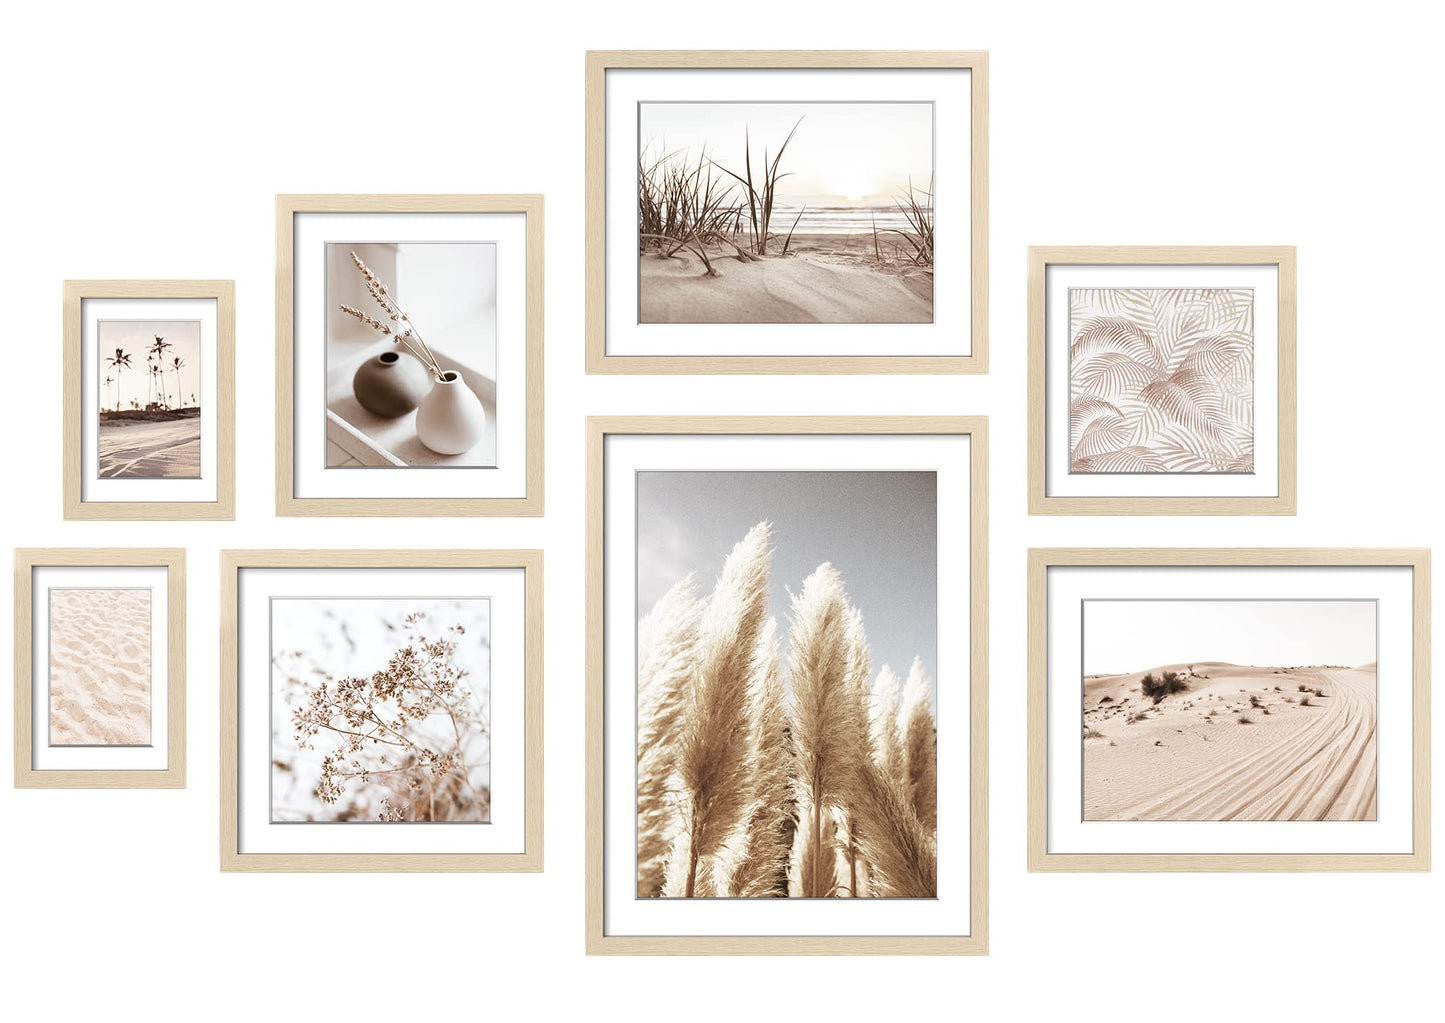 ArtbyHannah 8 Pack Gallery Wall Frame Set Neutral Wall Art Decor,Picture Frames Collage Wall Decor with Desert Pictures,Multiple Sizes…